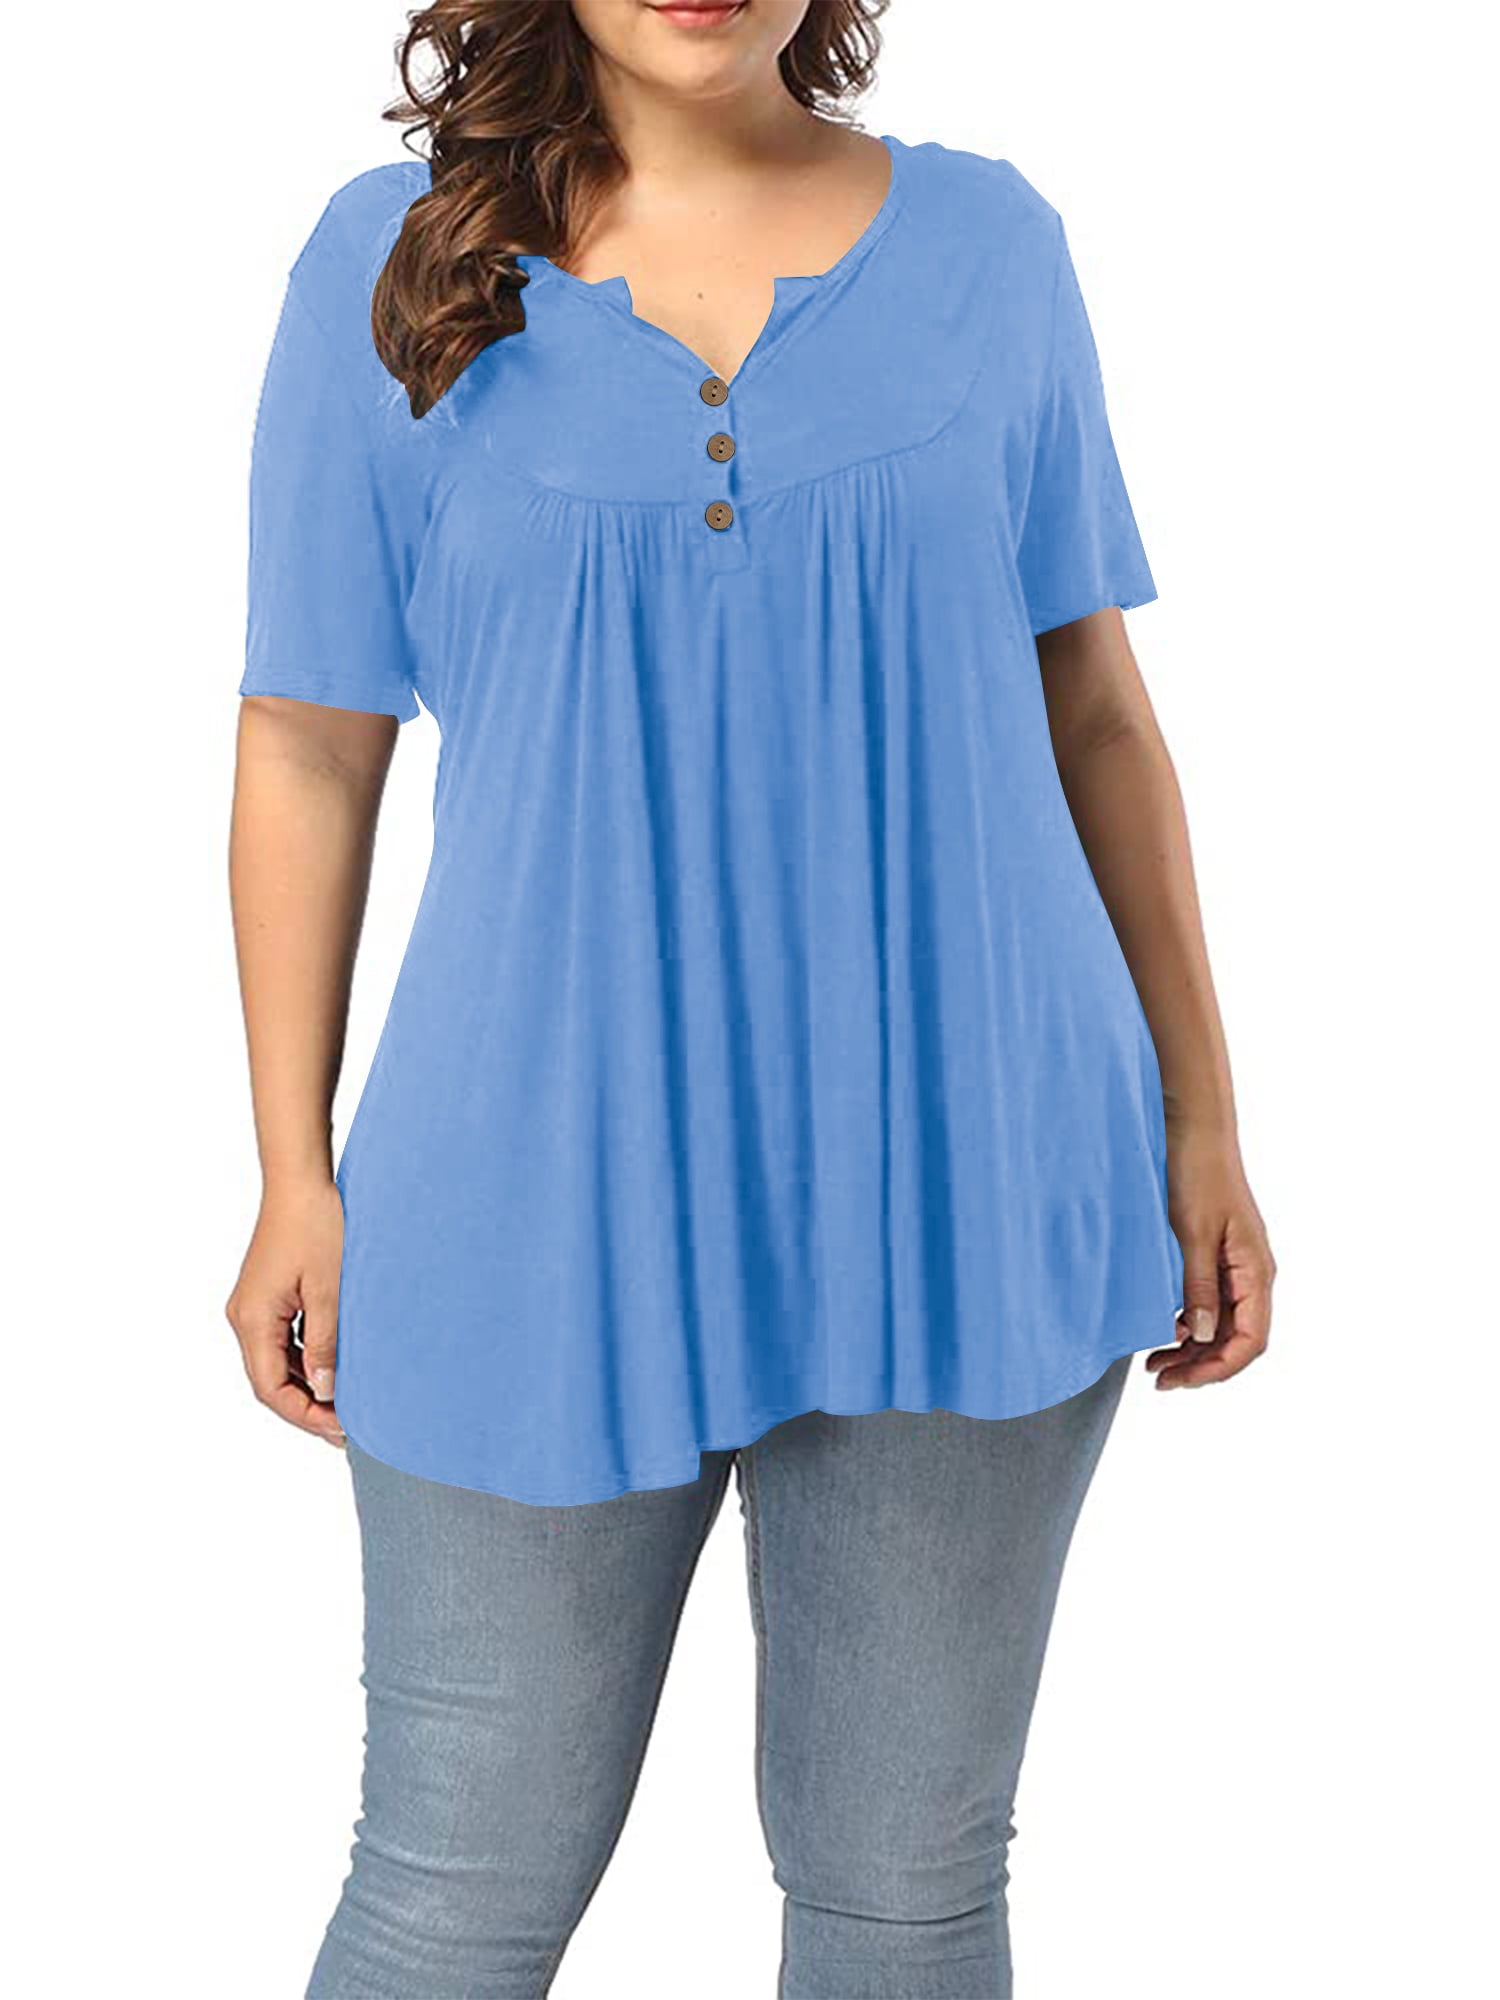 VISLILY Women's Plus Size Casual Short Sleeve Buttons Tunic T Shirt Blouse Tops 